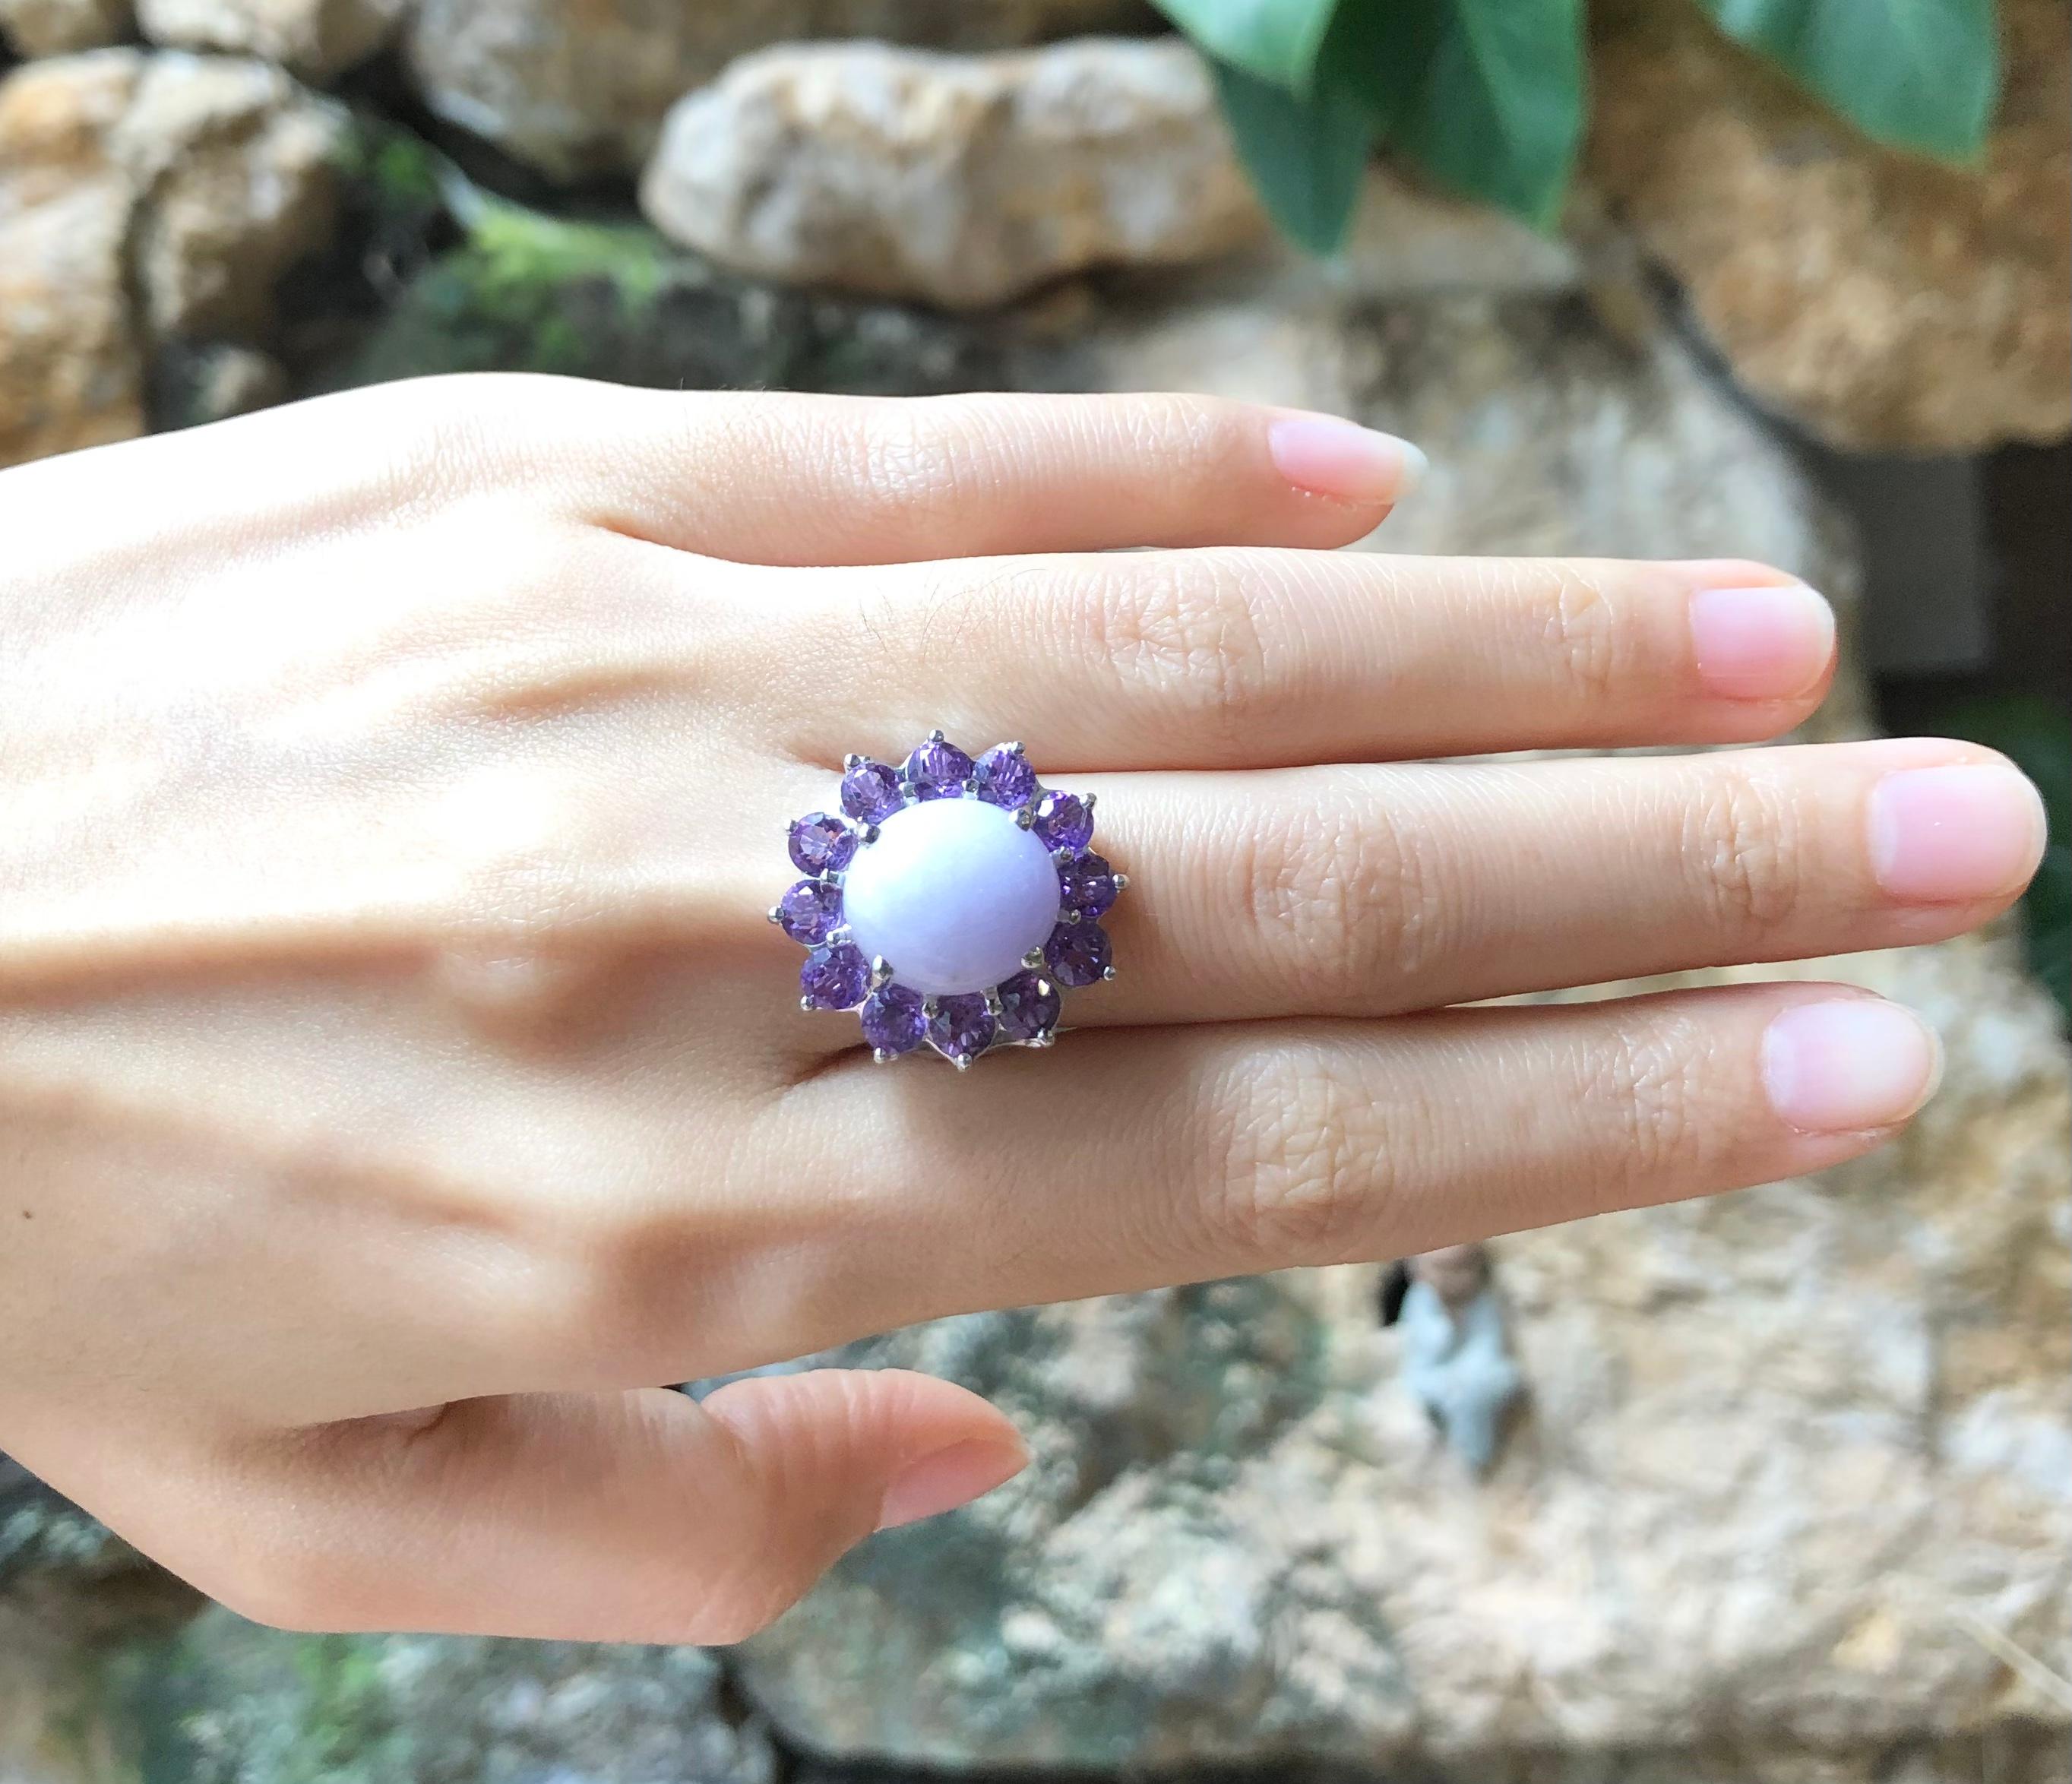 Lavender Jade 9.86 carats with Amethyst 2.90 carats Ring set in 18 Karat White Gold Settings

Width:  1.8 cm 
Length: 2.2 cm
Ring Size: 53
Total Weight: 12.82 grams

